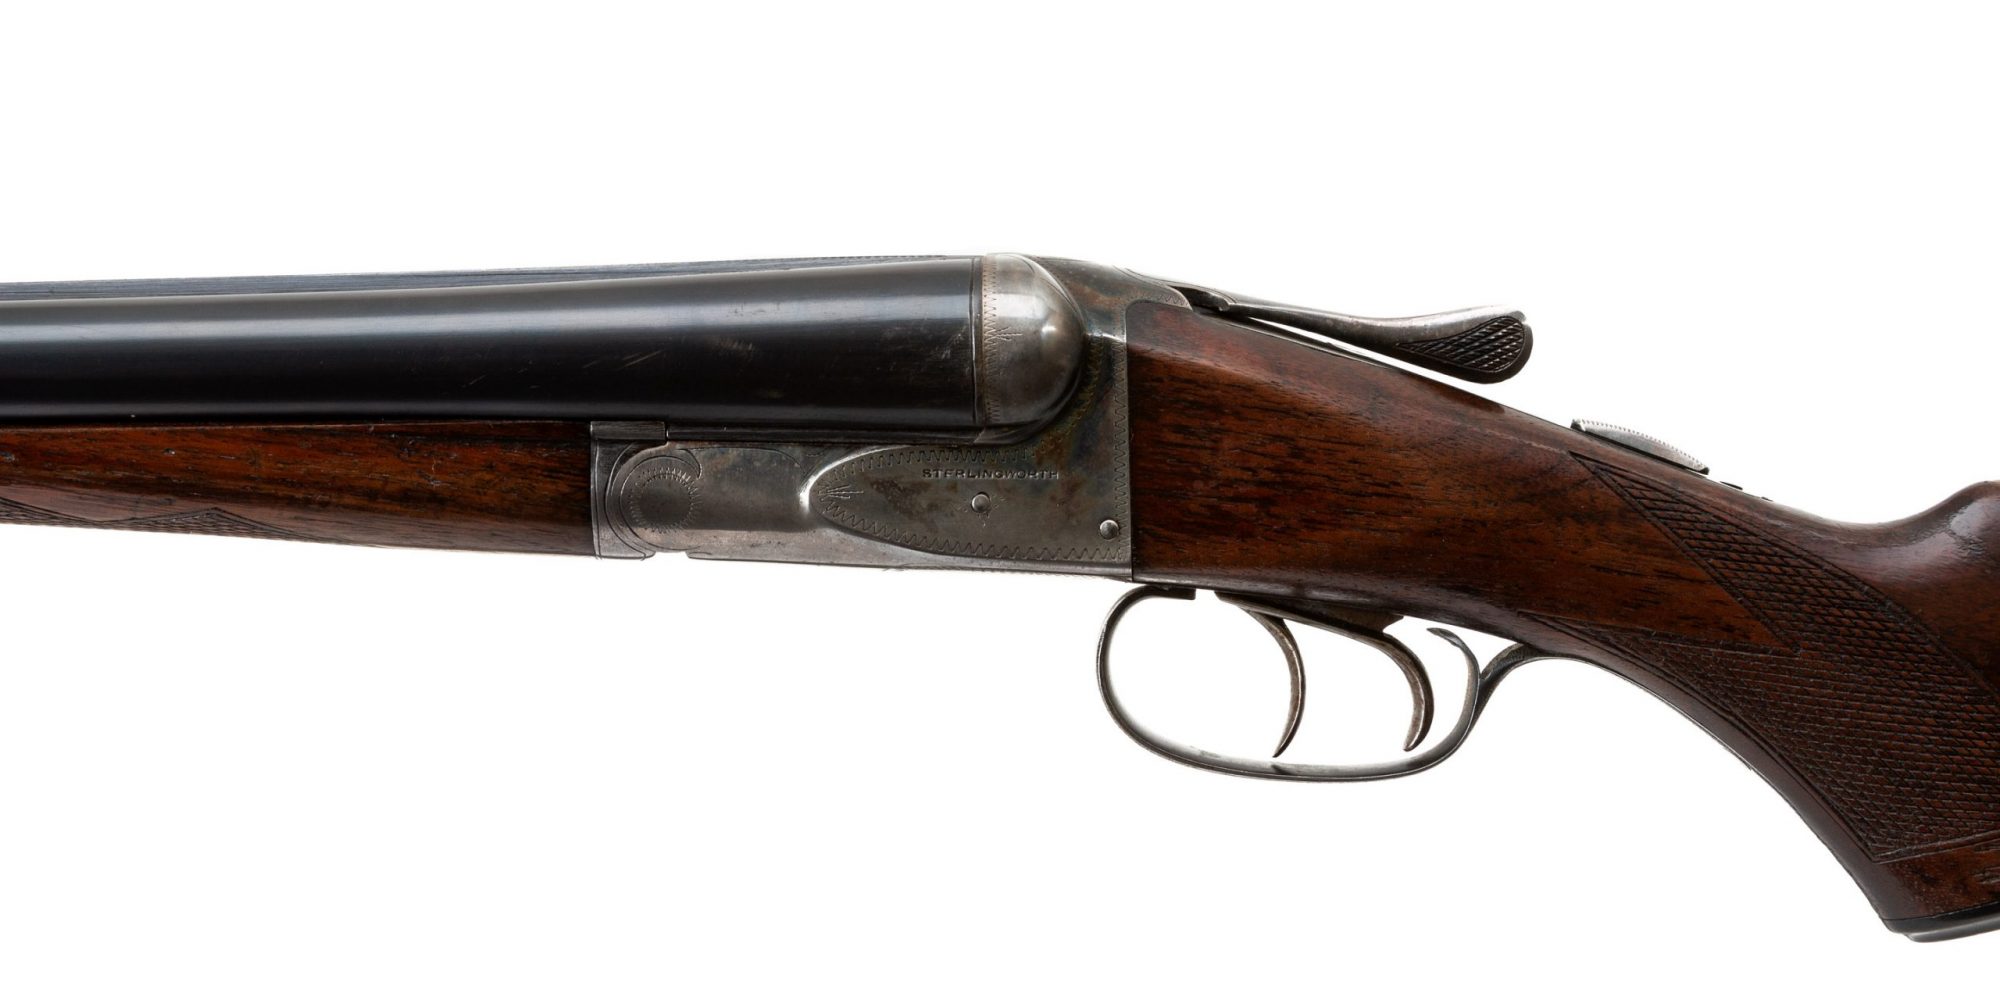 Photo of a pre-owned Fox Sterlingworth 12 gauge double gun from from circa 1943-45, for sale by Turnbull Restoration of Bloomfield, NY